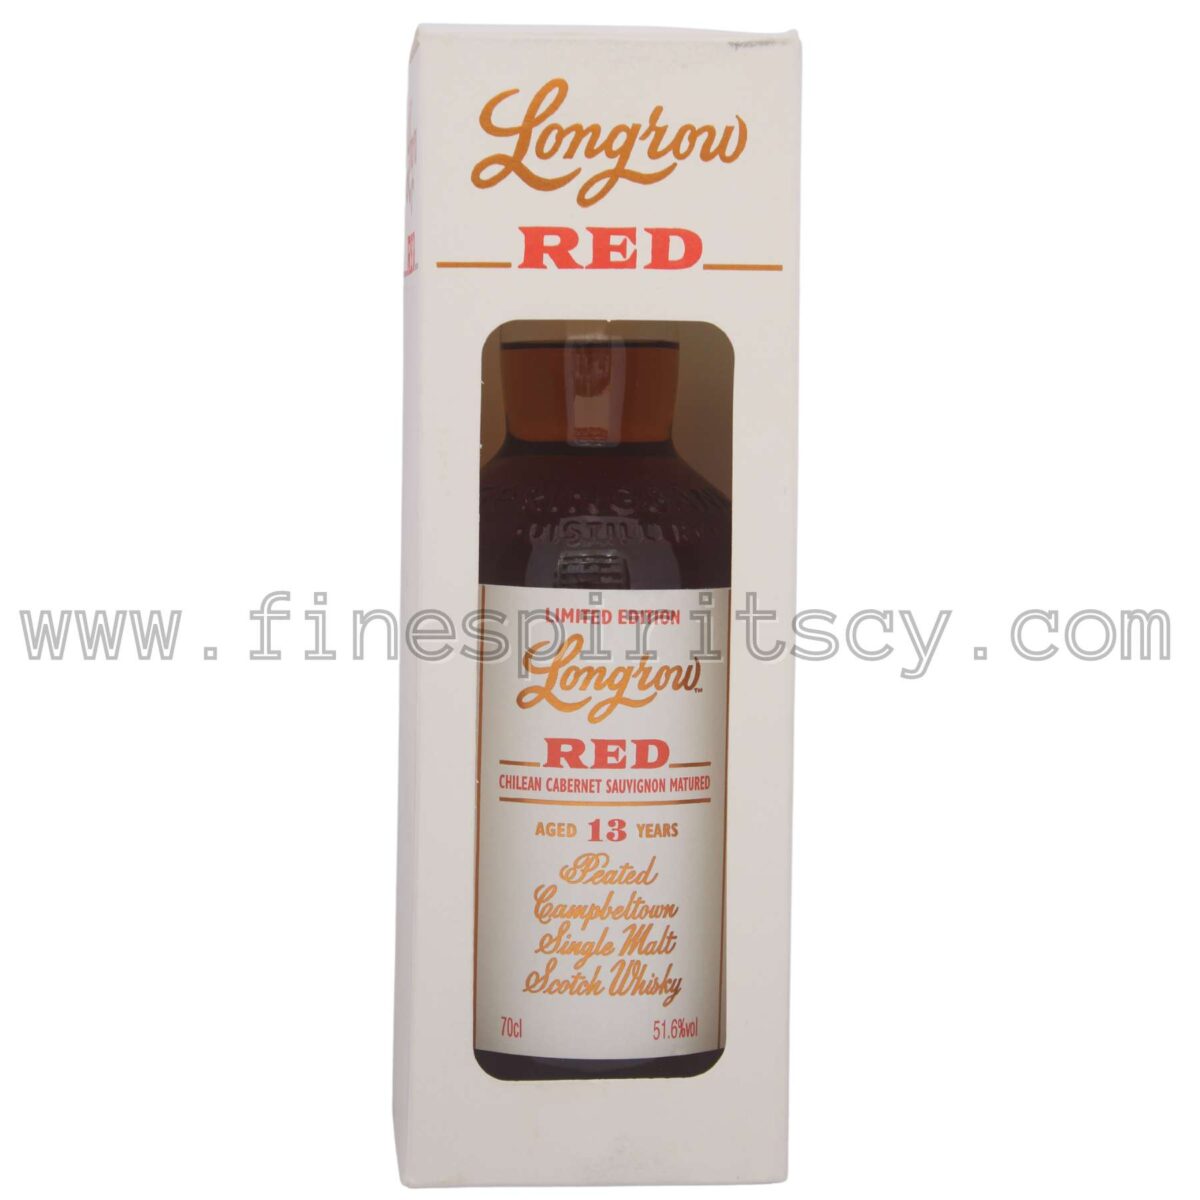 Longrow 13 Year Old Red Chilean Cabernet Sauvignon Cyprus Price Whisky Online